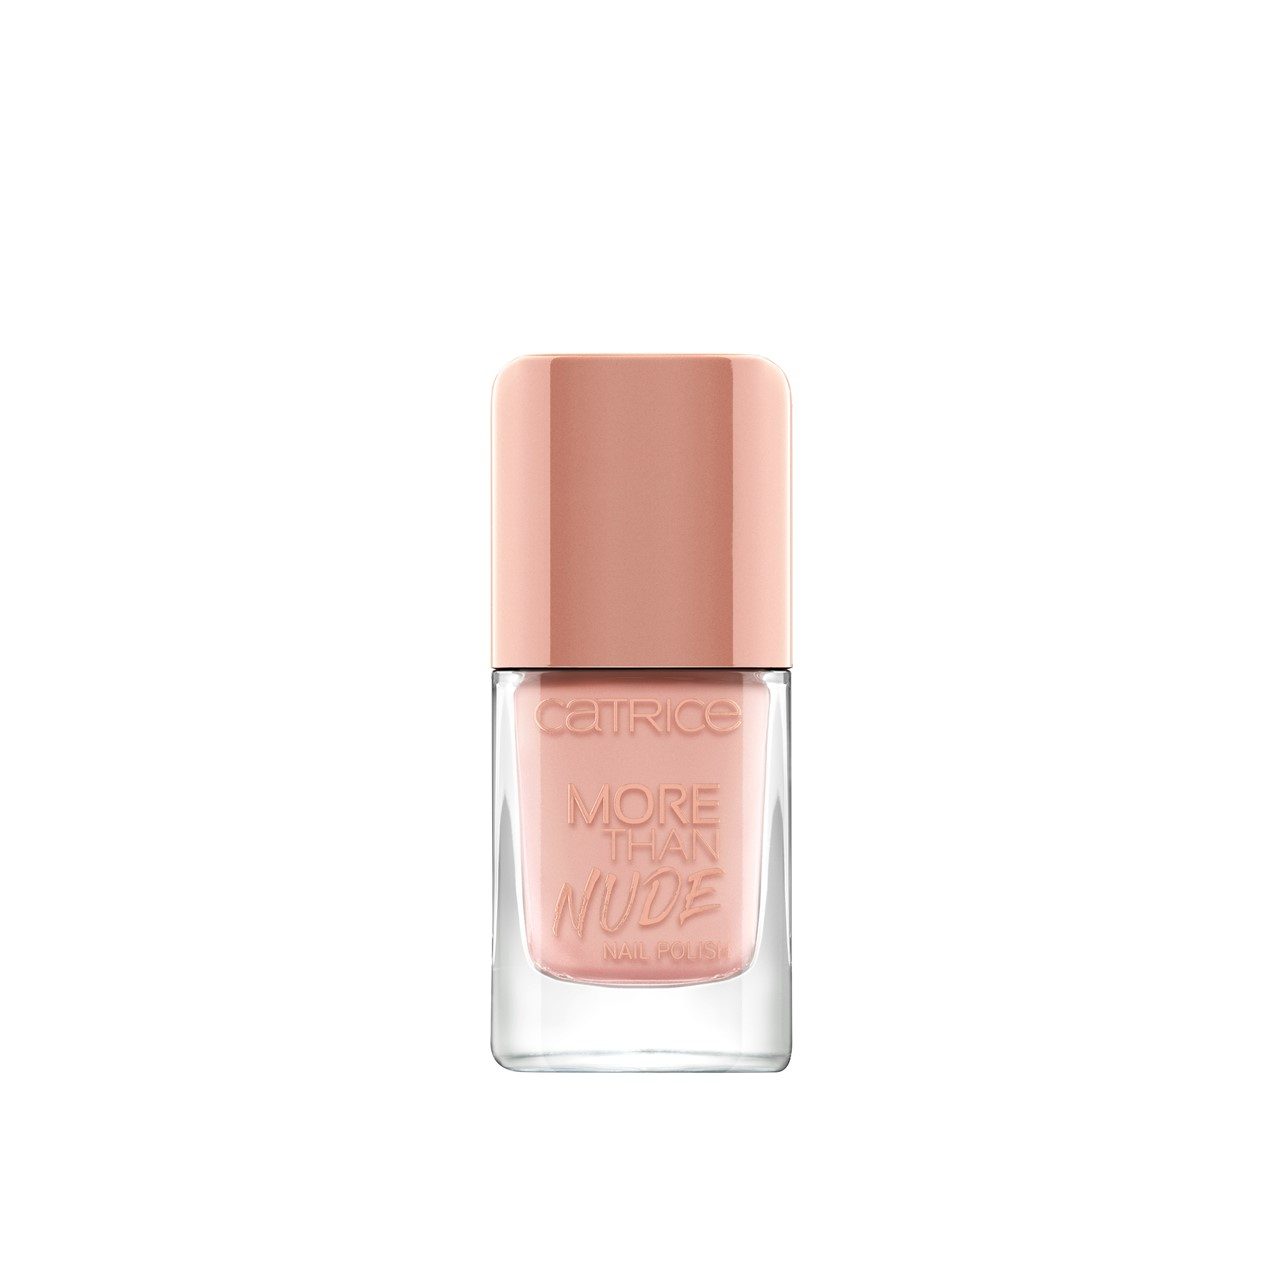 Catrice More Than Nude Nail Polish 07 Nudie Beautie 10.5ml